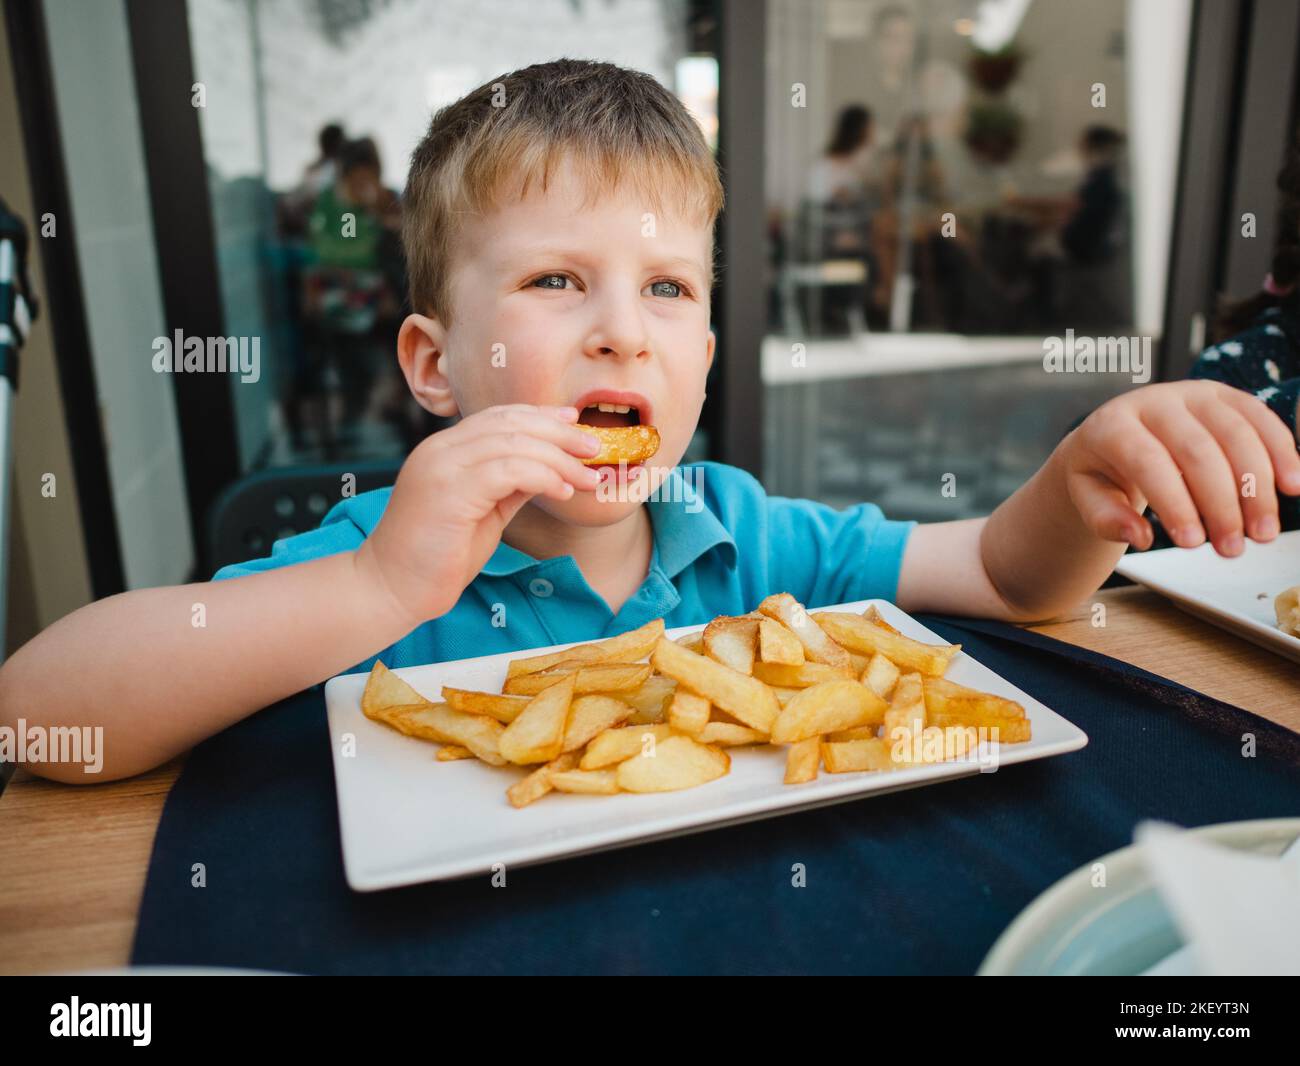 Small child eating fried chips Stock Photo